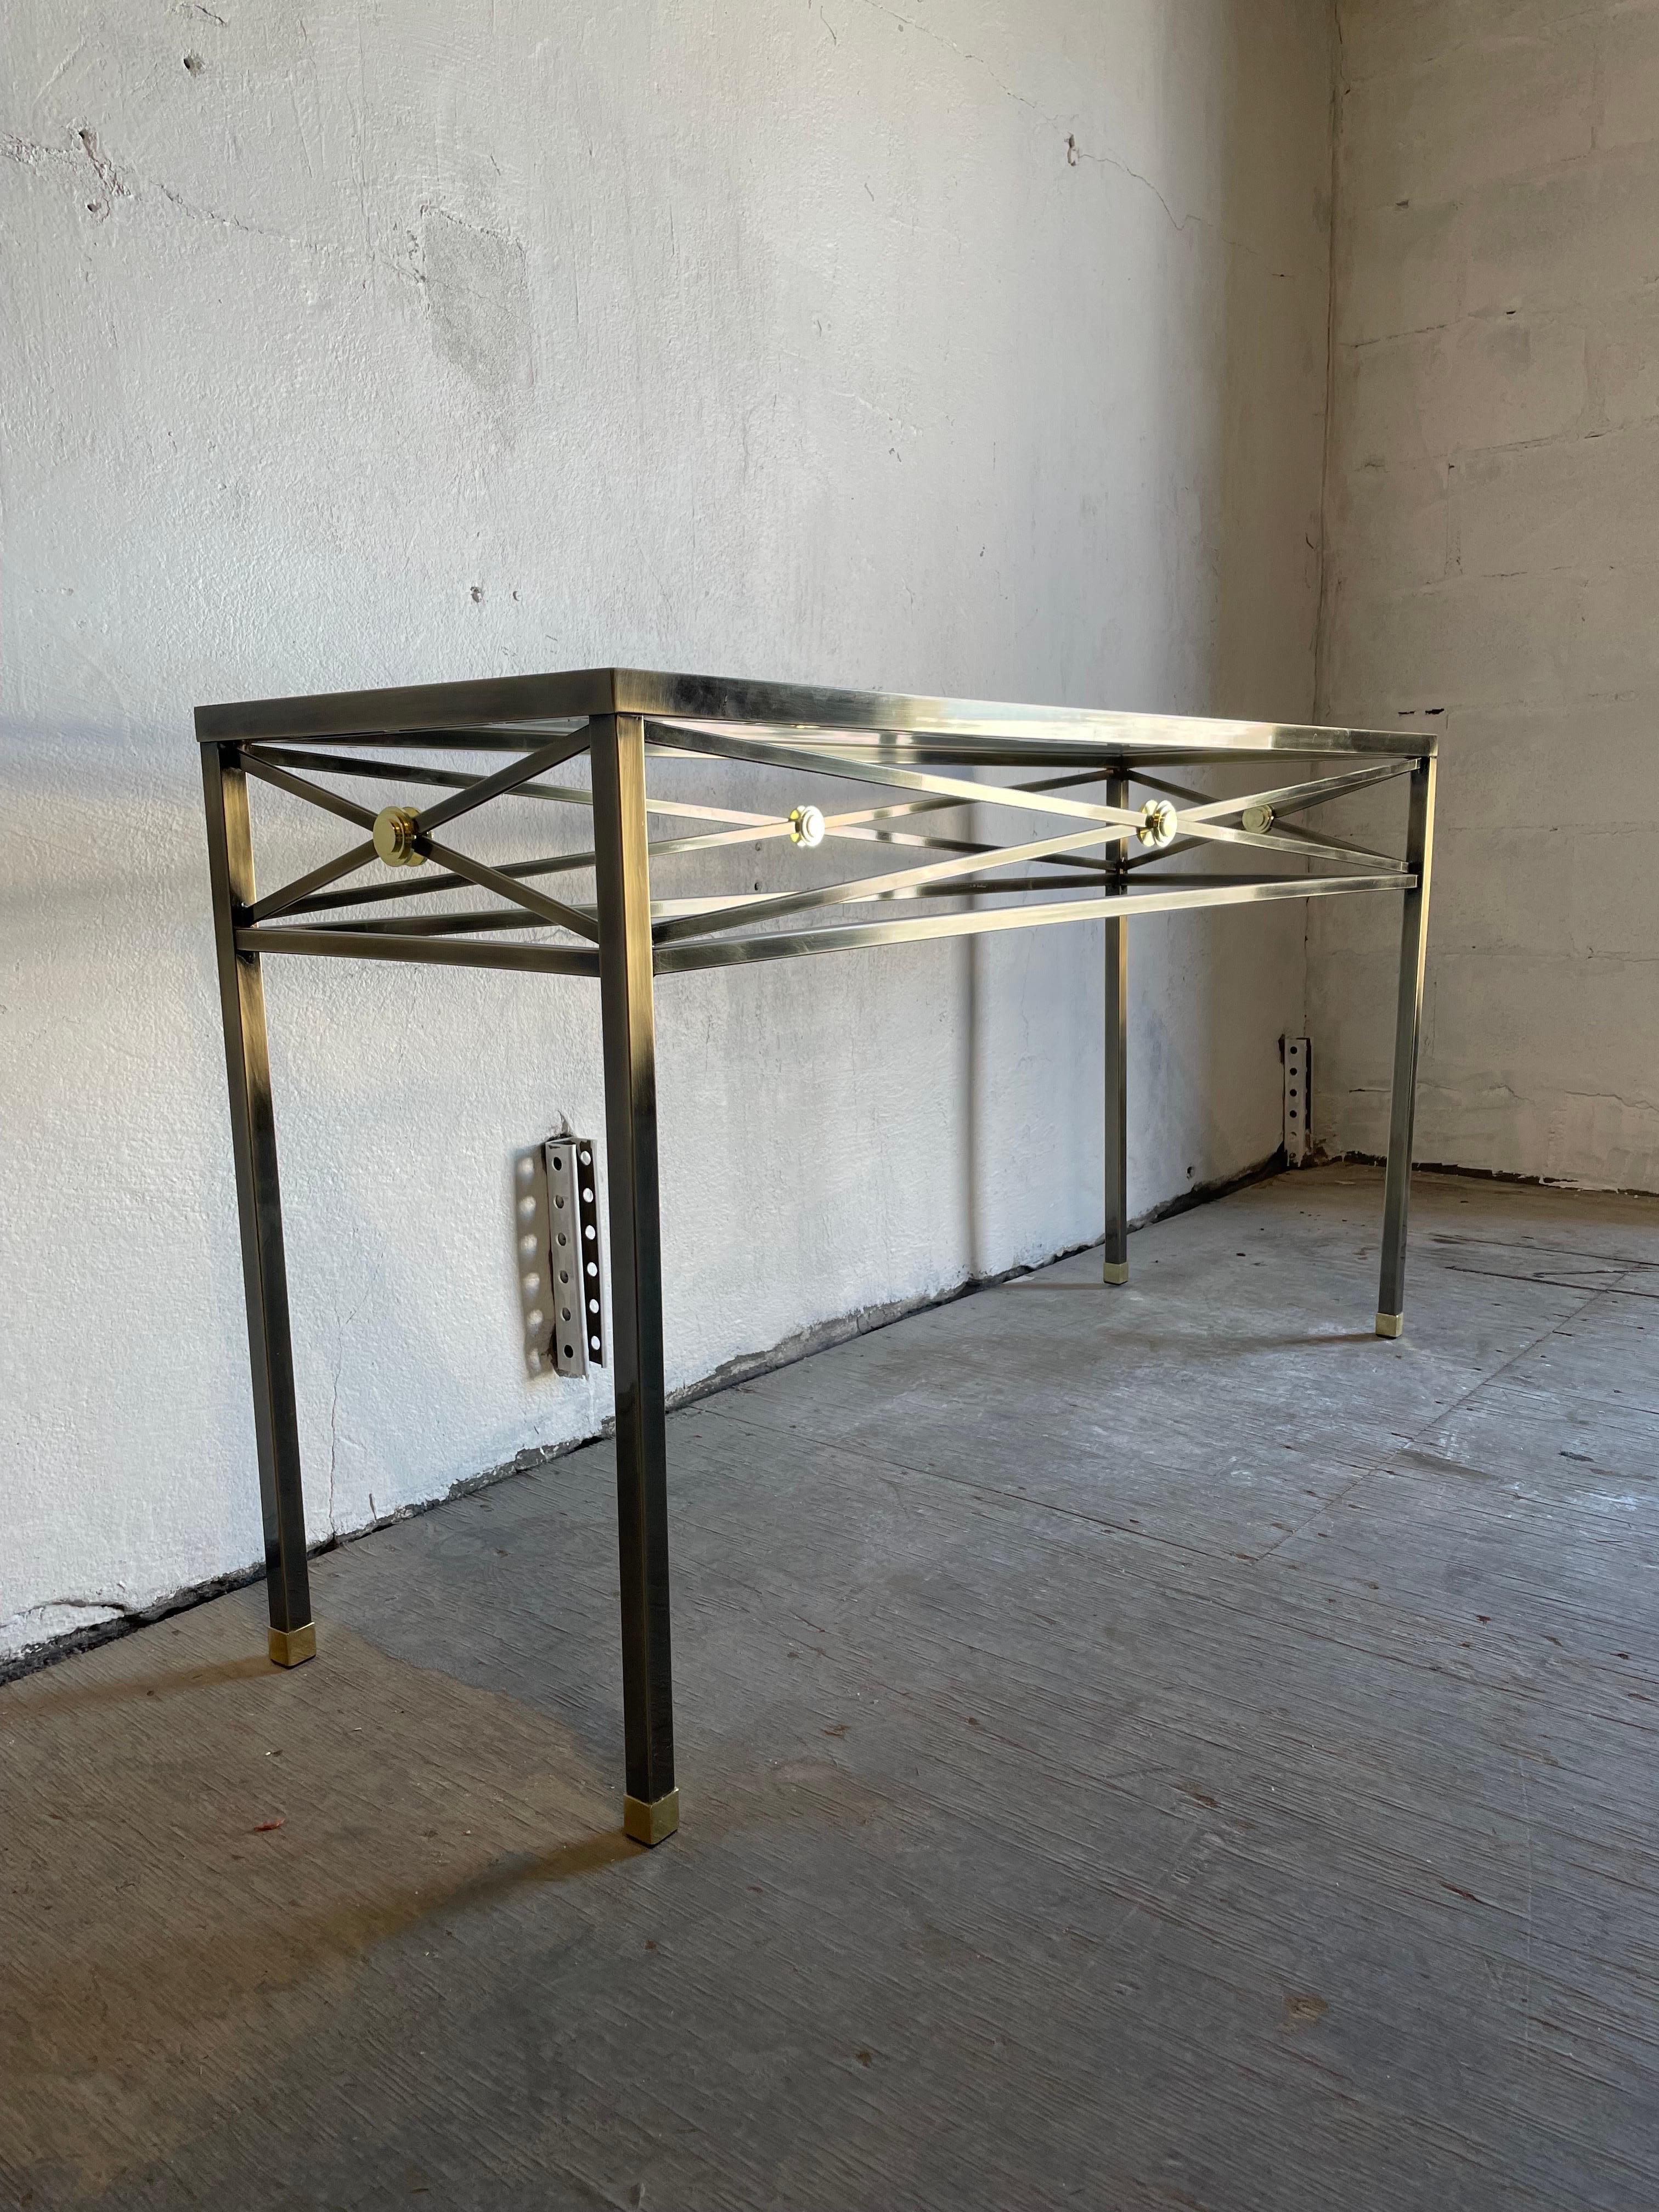 Brushed bronze console / sofa table by Design Institute of America. Classic modern neoclassical X form stretchers with brass medallions with capped legs.
Can deliver curbside to NYC/Philly $300.